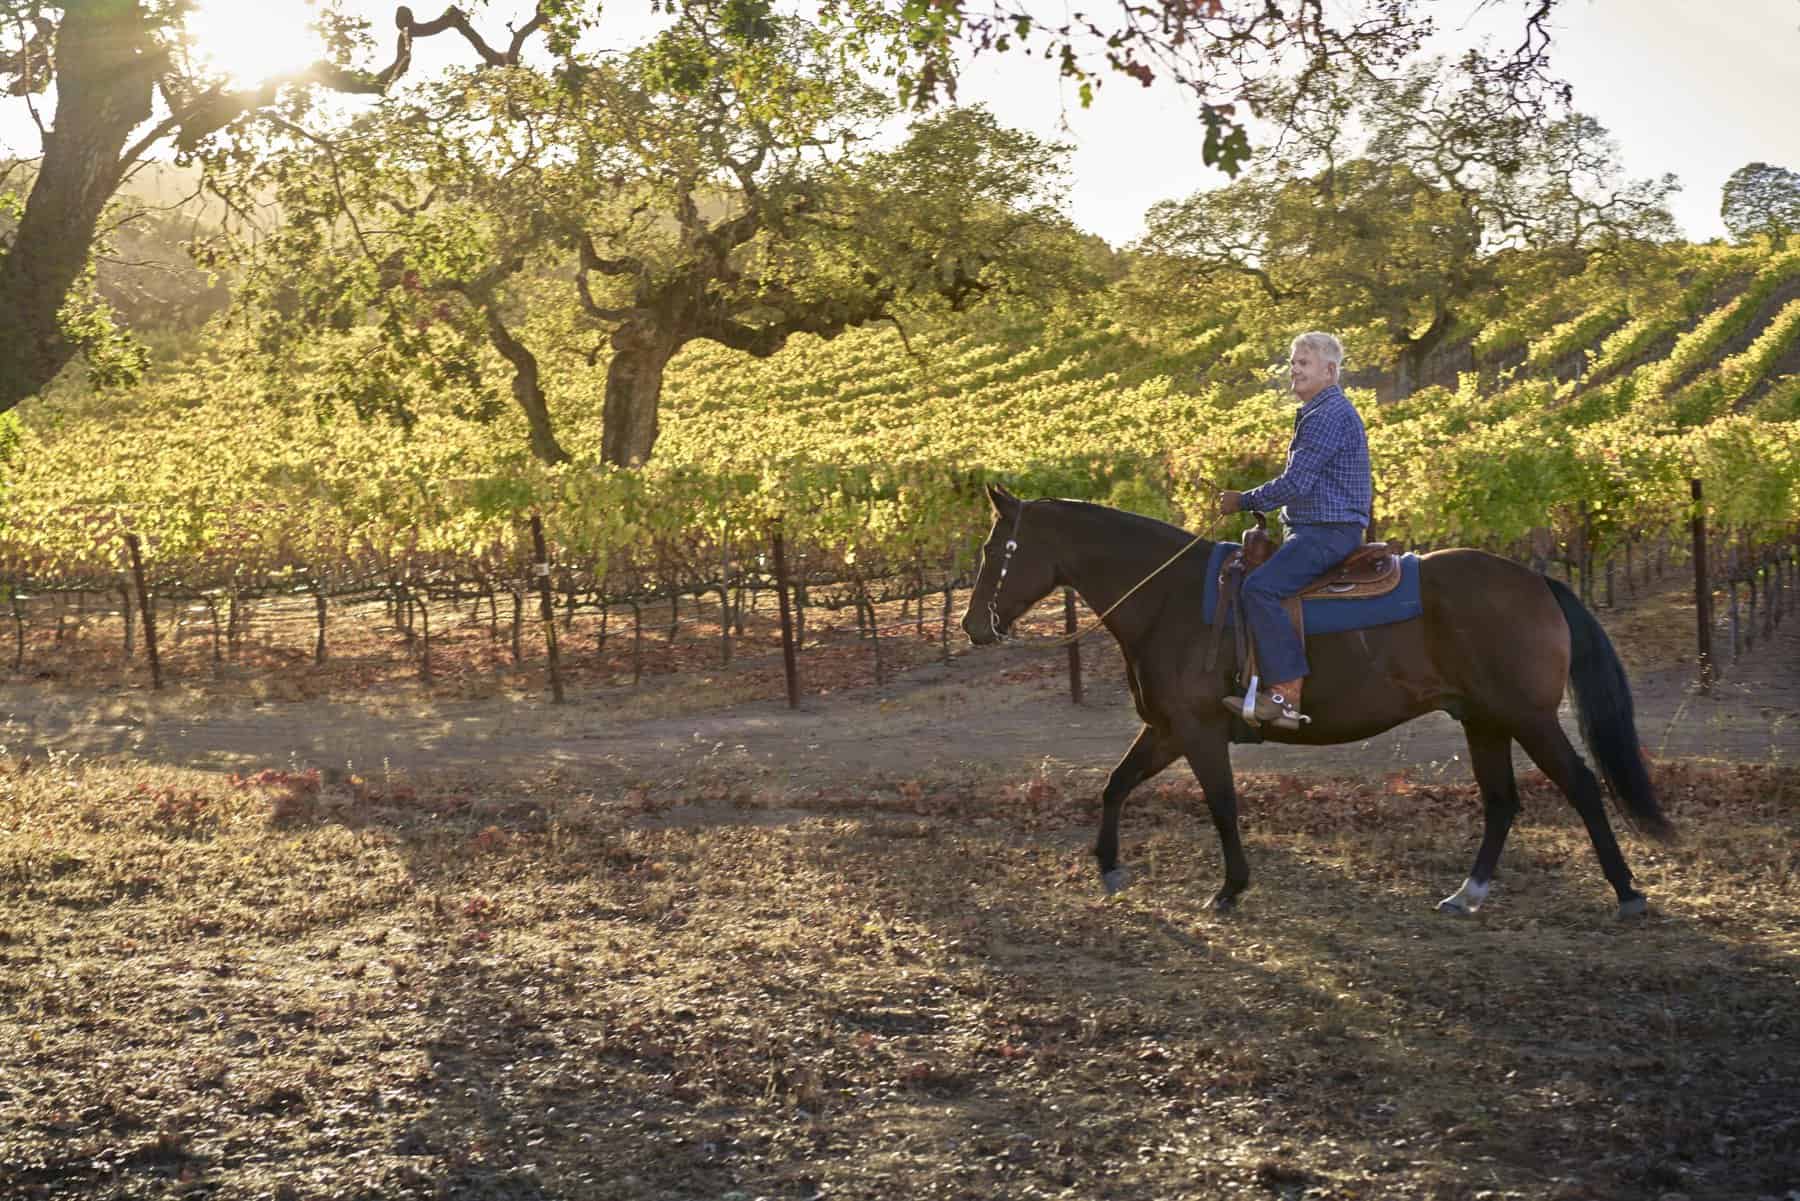 Winemaker of Etude Wines rides a horse along the vineyard.